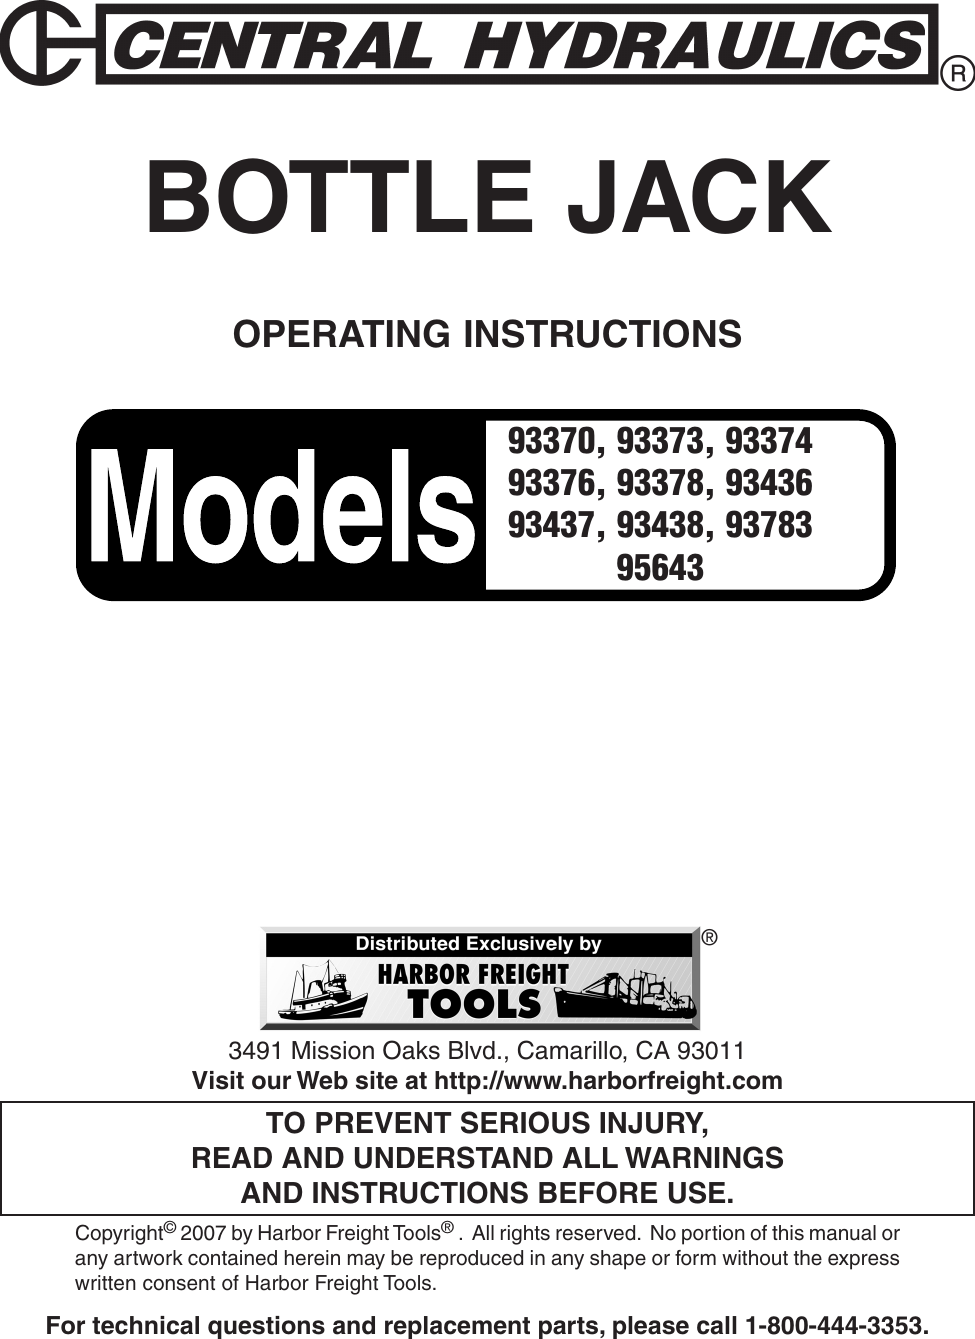 Page 1 of 8 - Harbor-Freight Harbor-Freight-93370-Users-Manual- 05532 05533 05534 Bottle Jacks  Harbor-freight-93370-users-manual